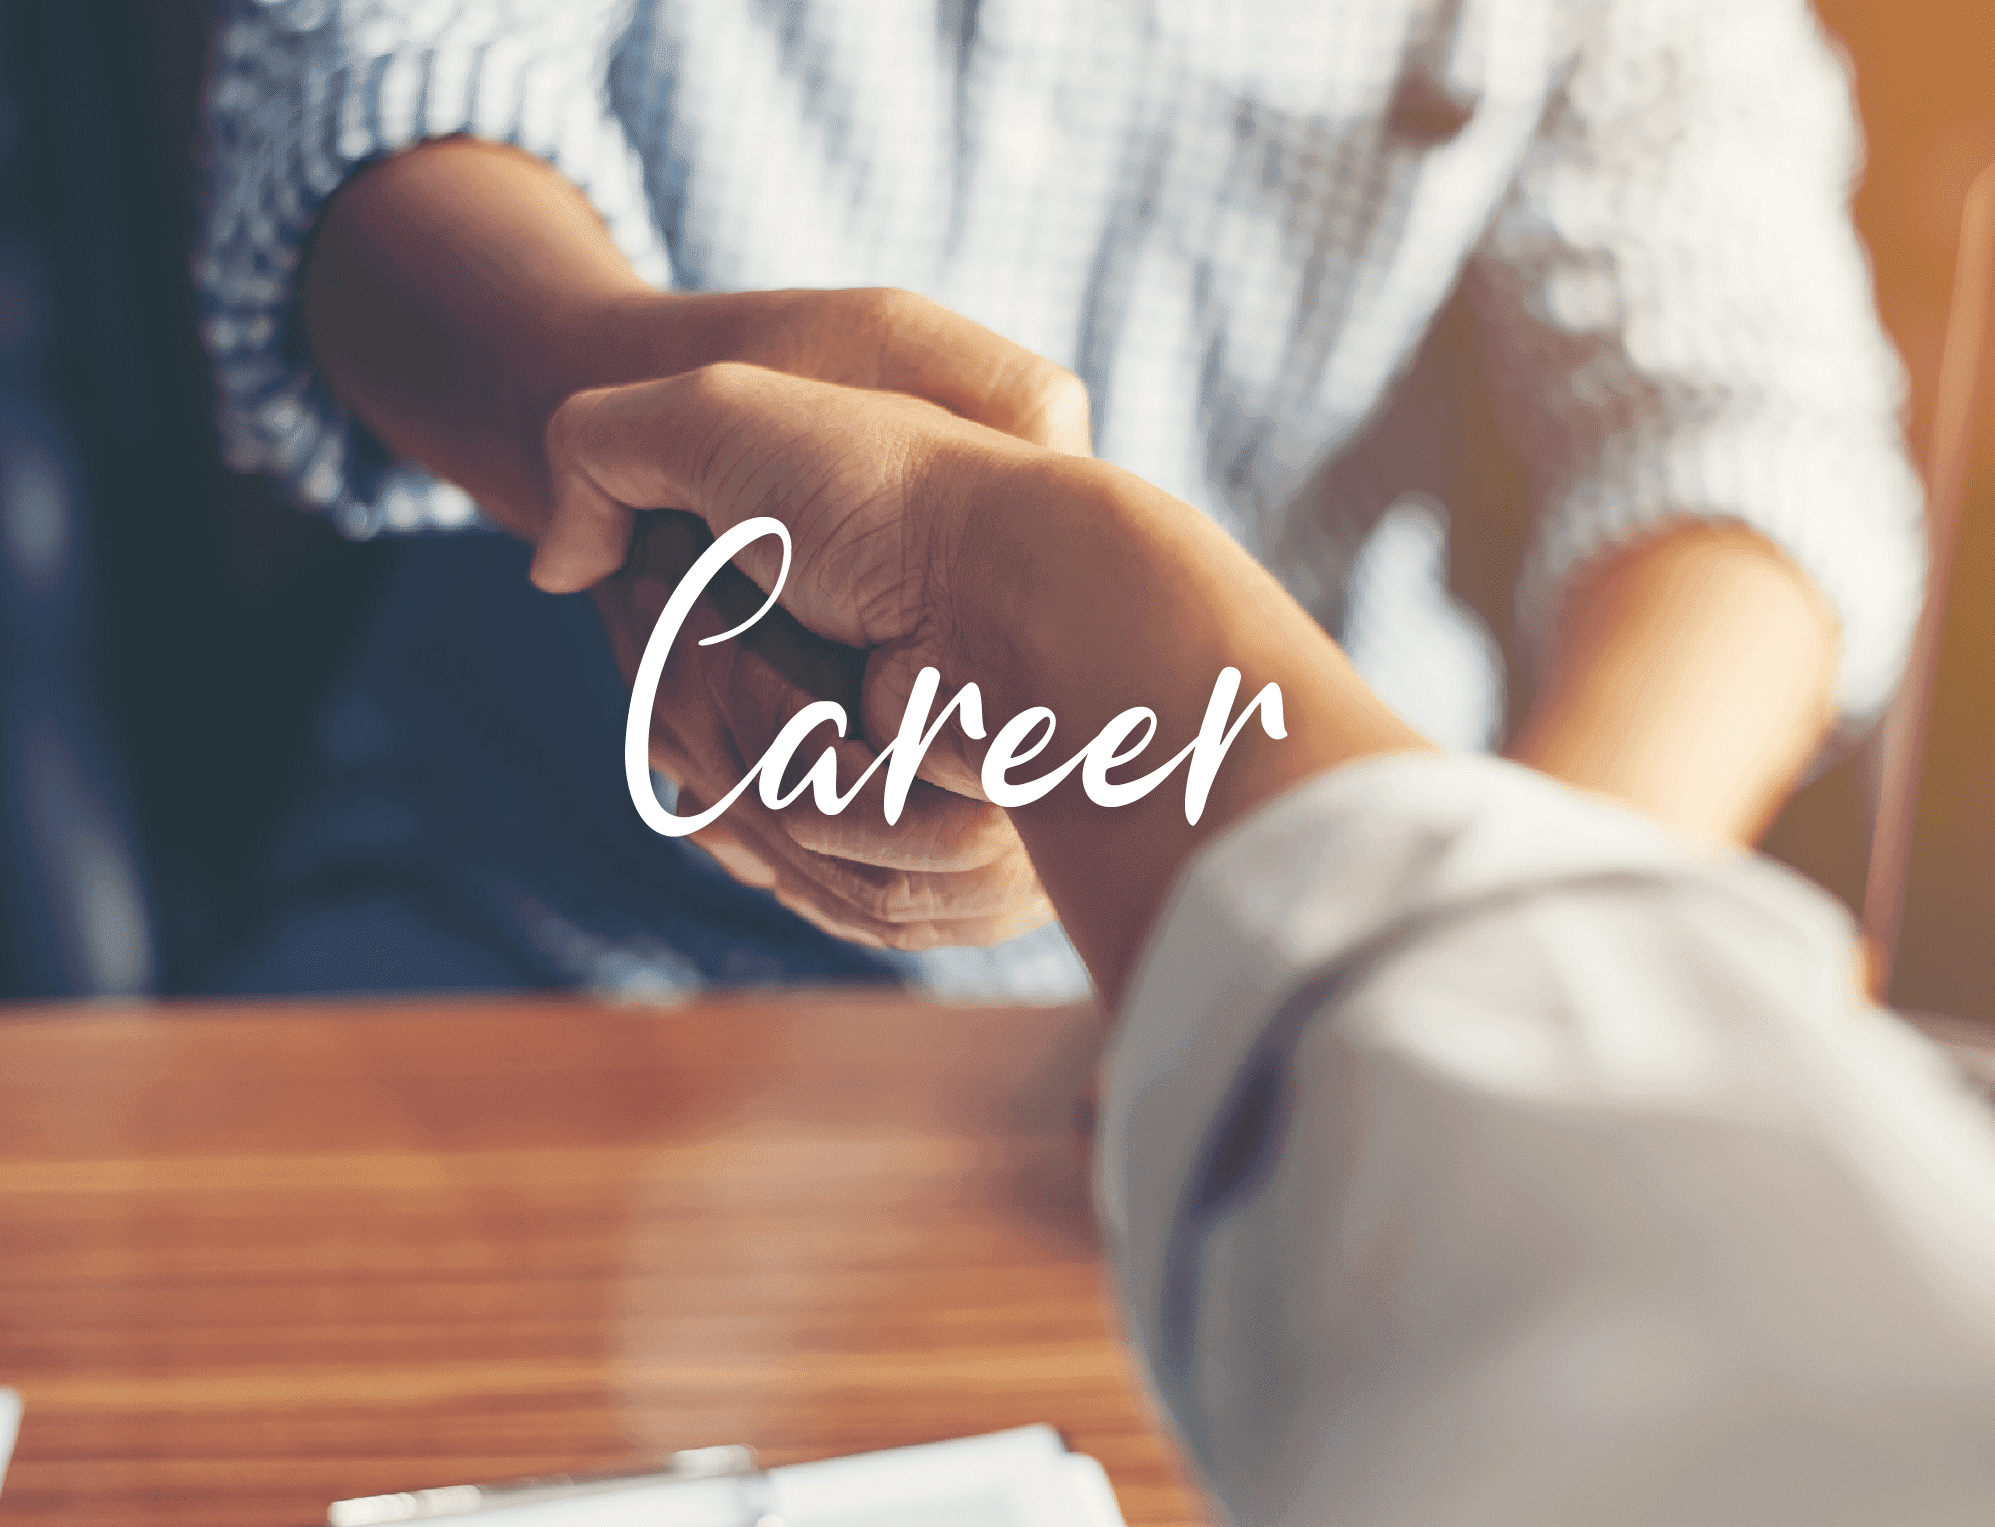 Careers Banner